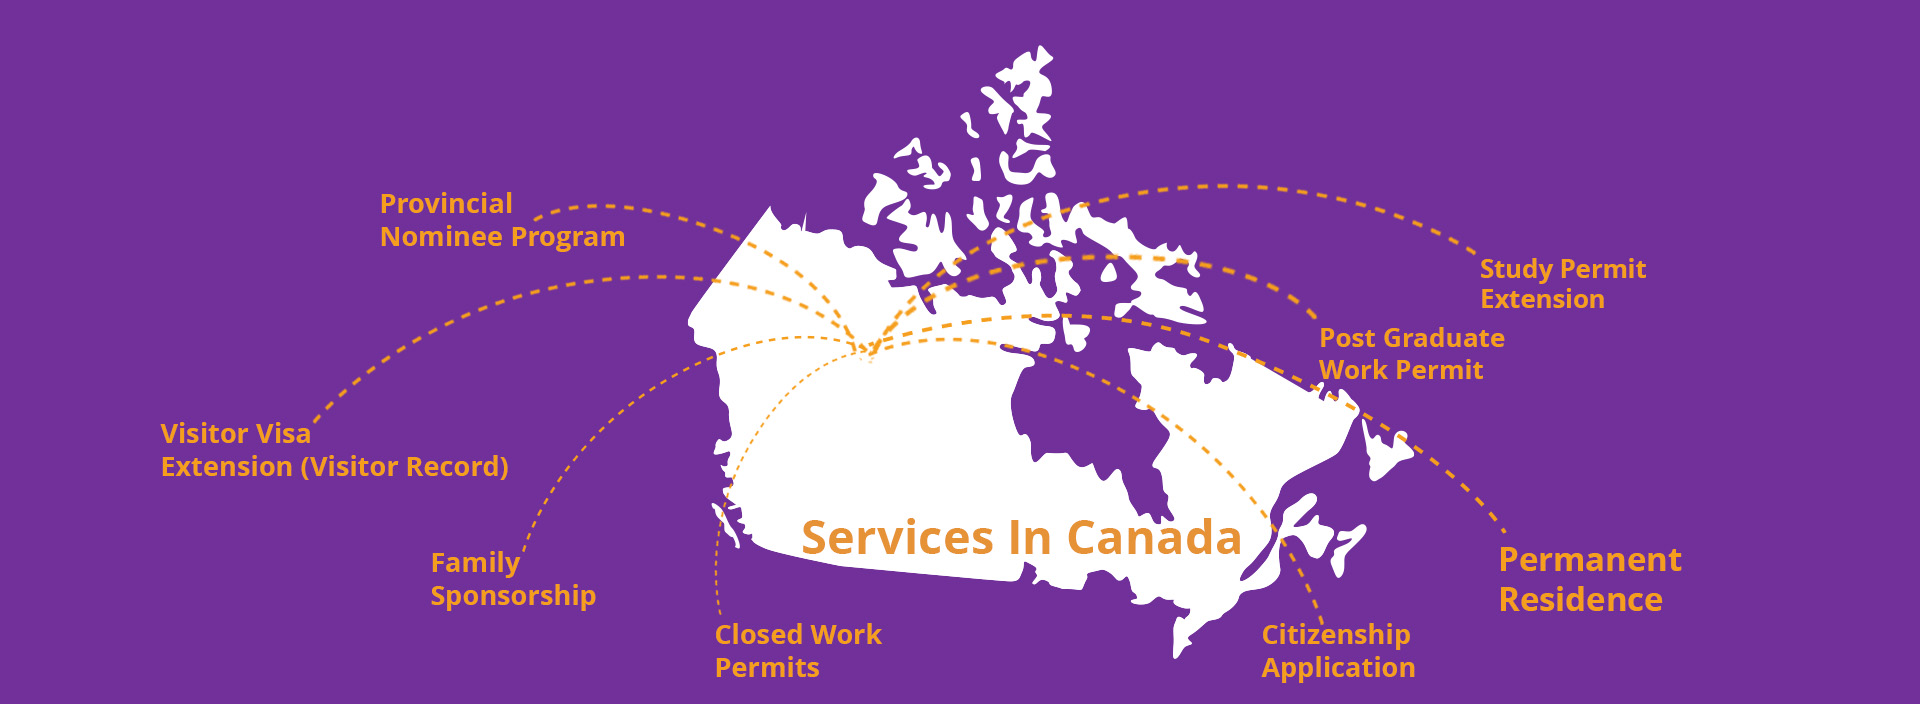 services in Canada